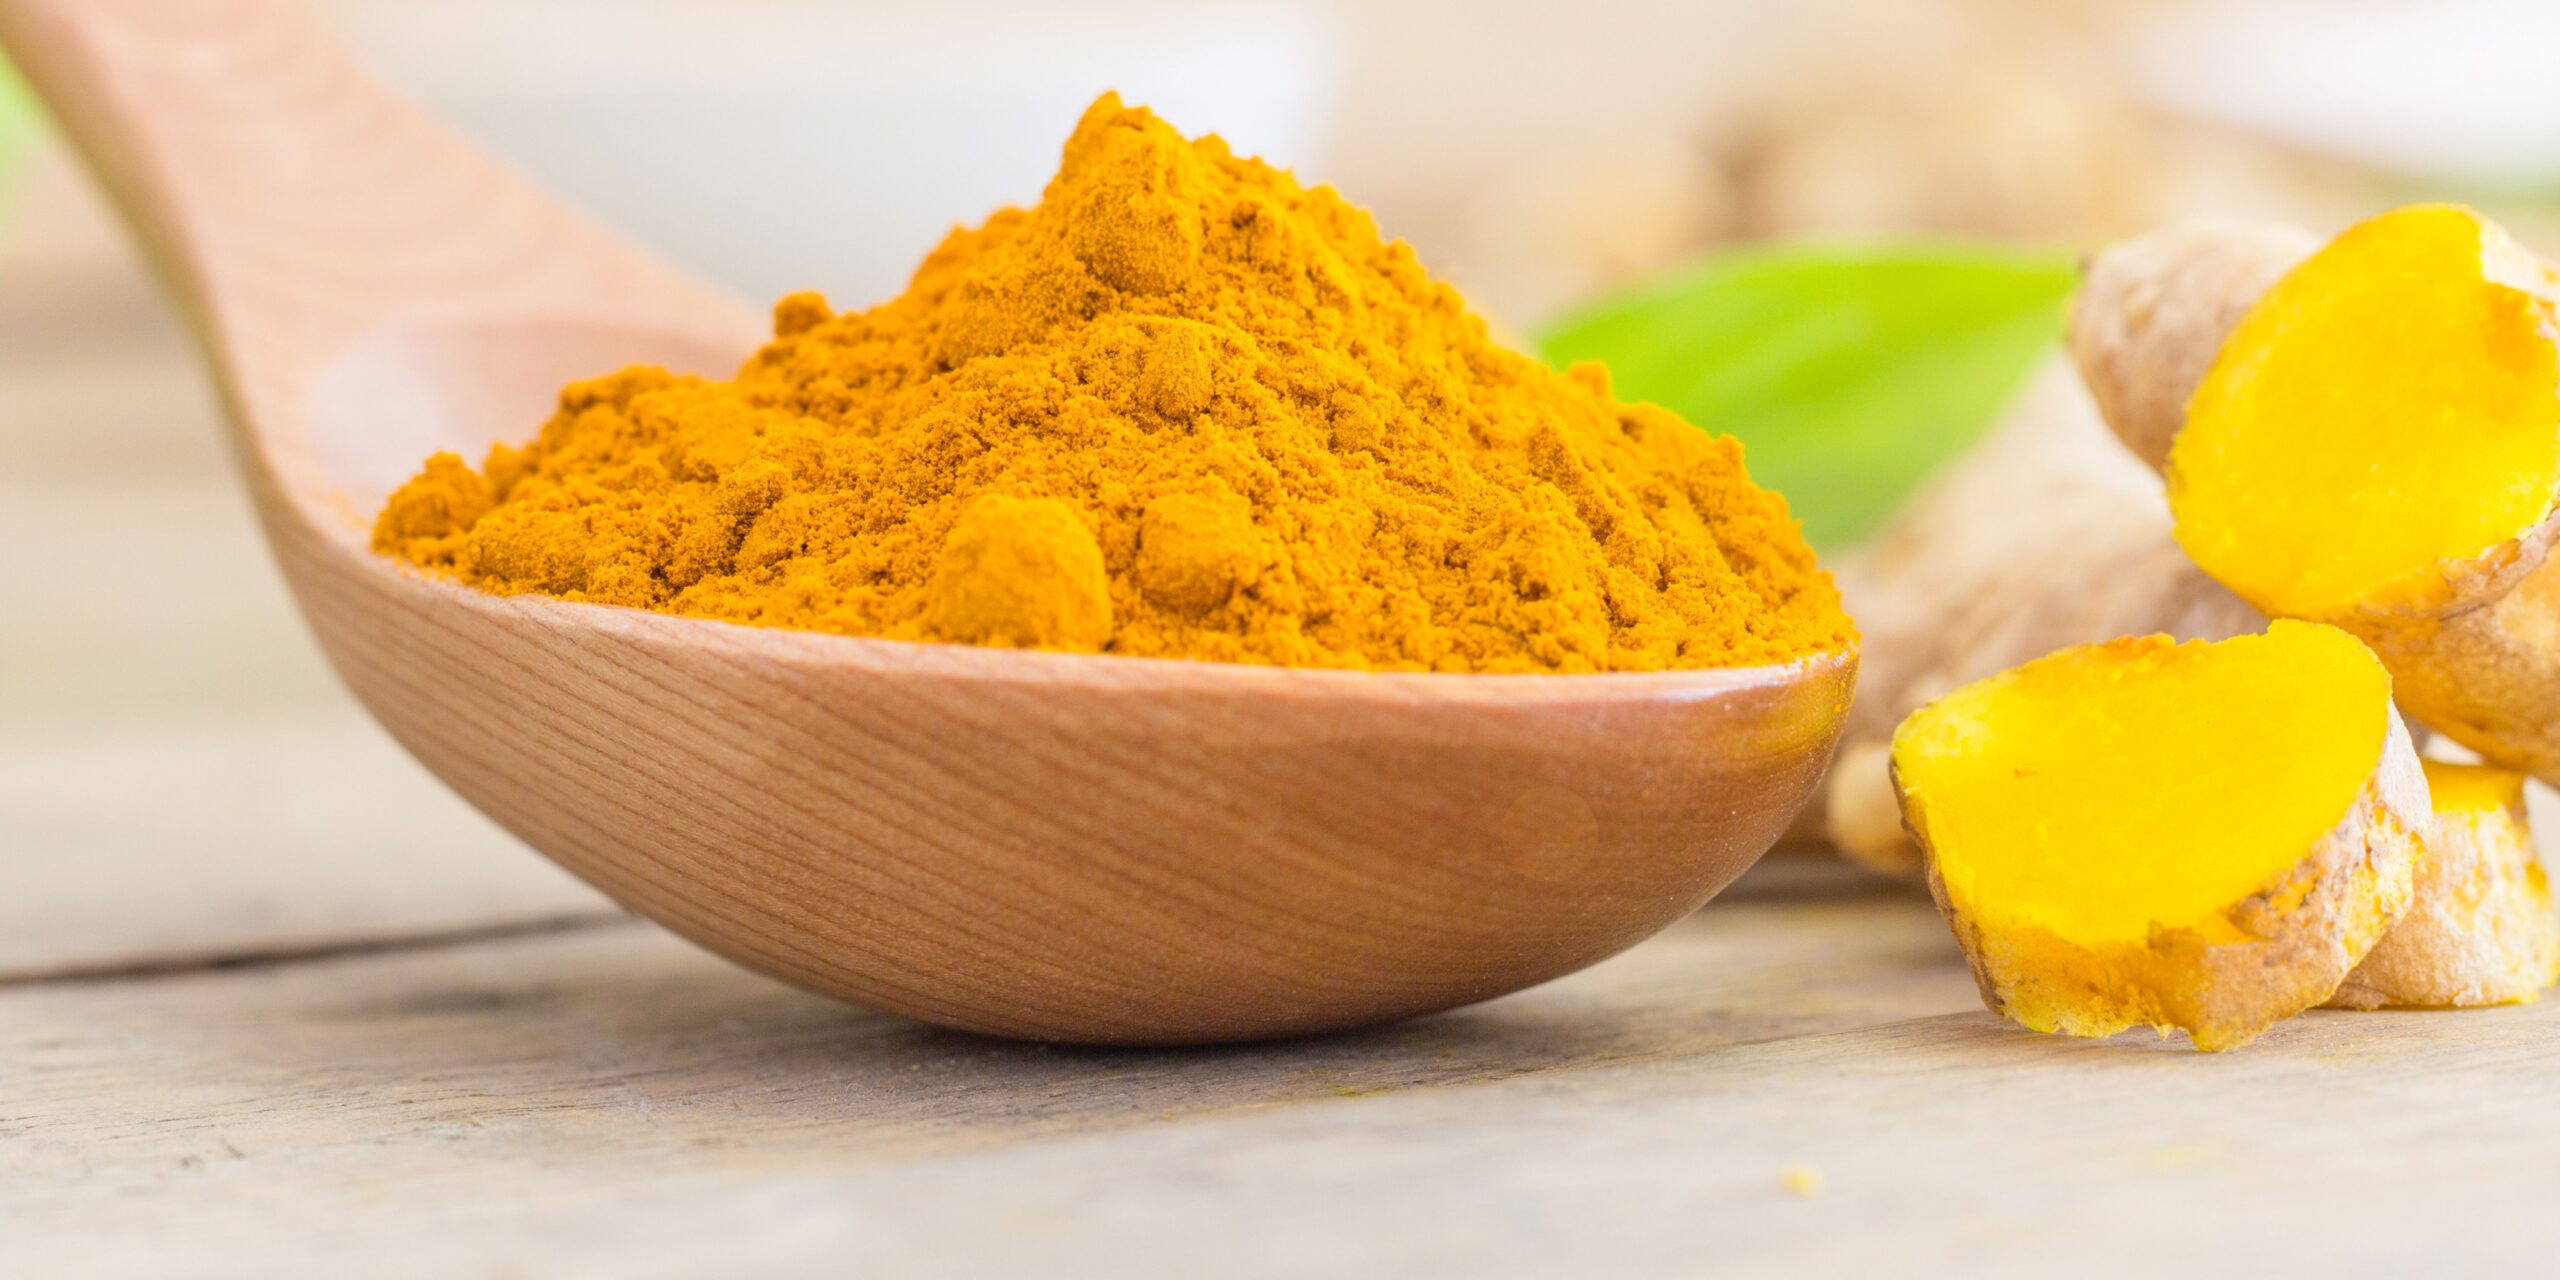 What illness does turmeric cure?